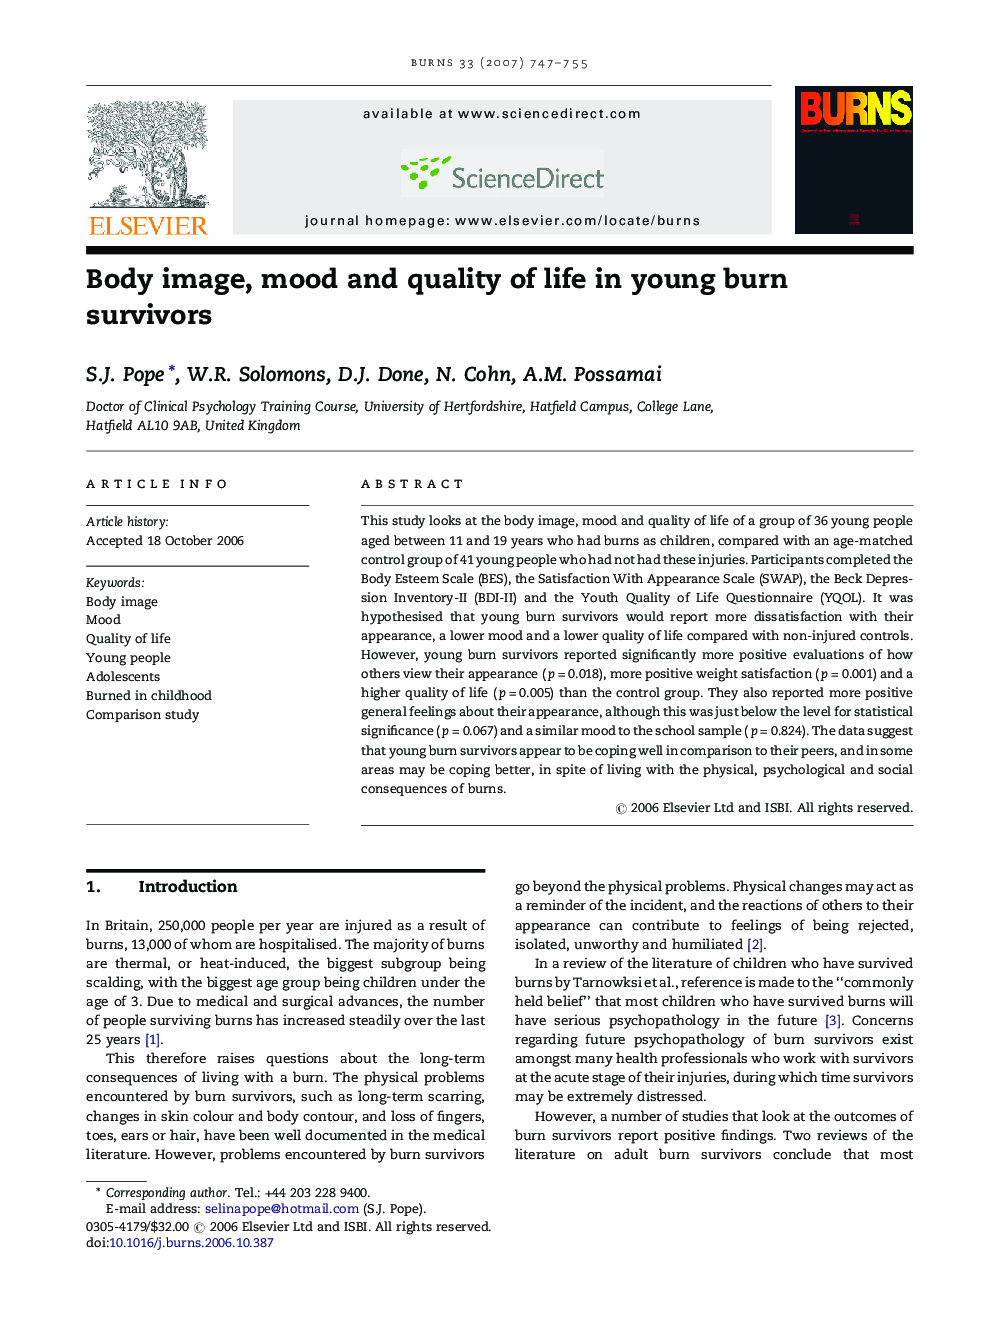 Body image, mood and quality of life in young burn survivors